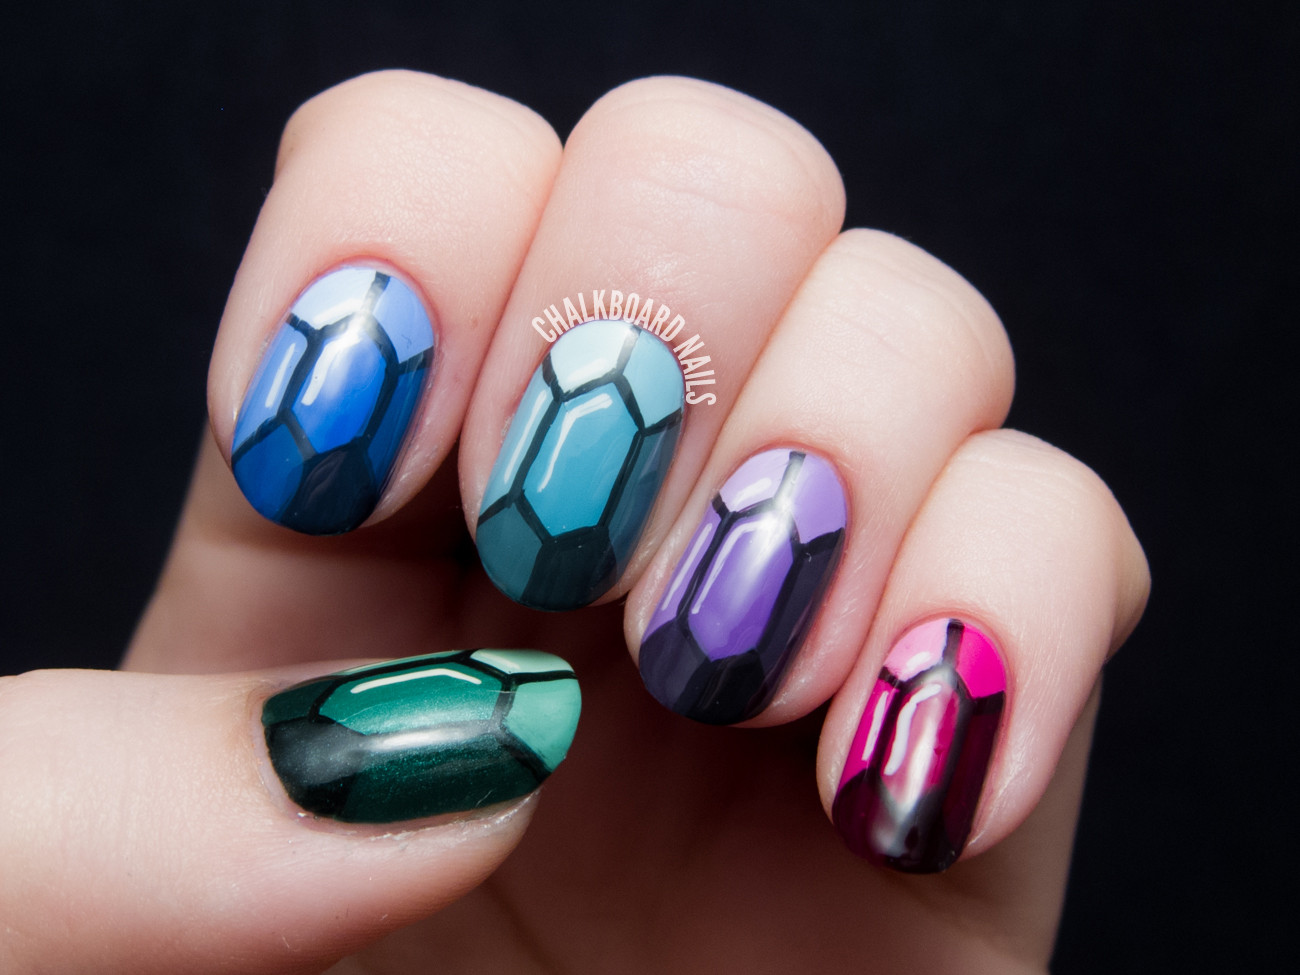 Nail Art With Gems
 TUTORIAL Precious Gems Nail Art Inspired by The Ring and